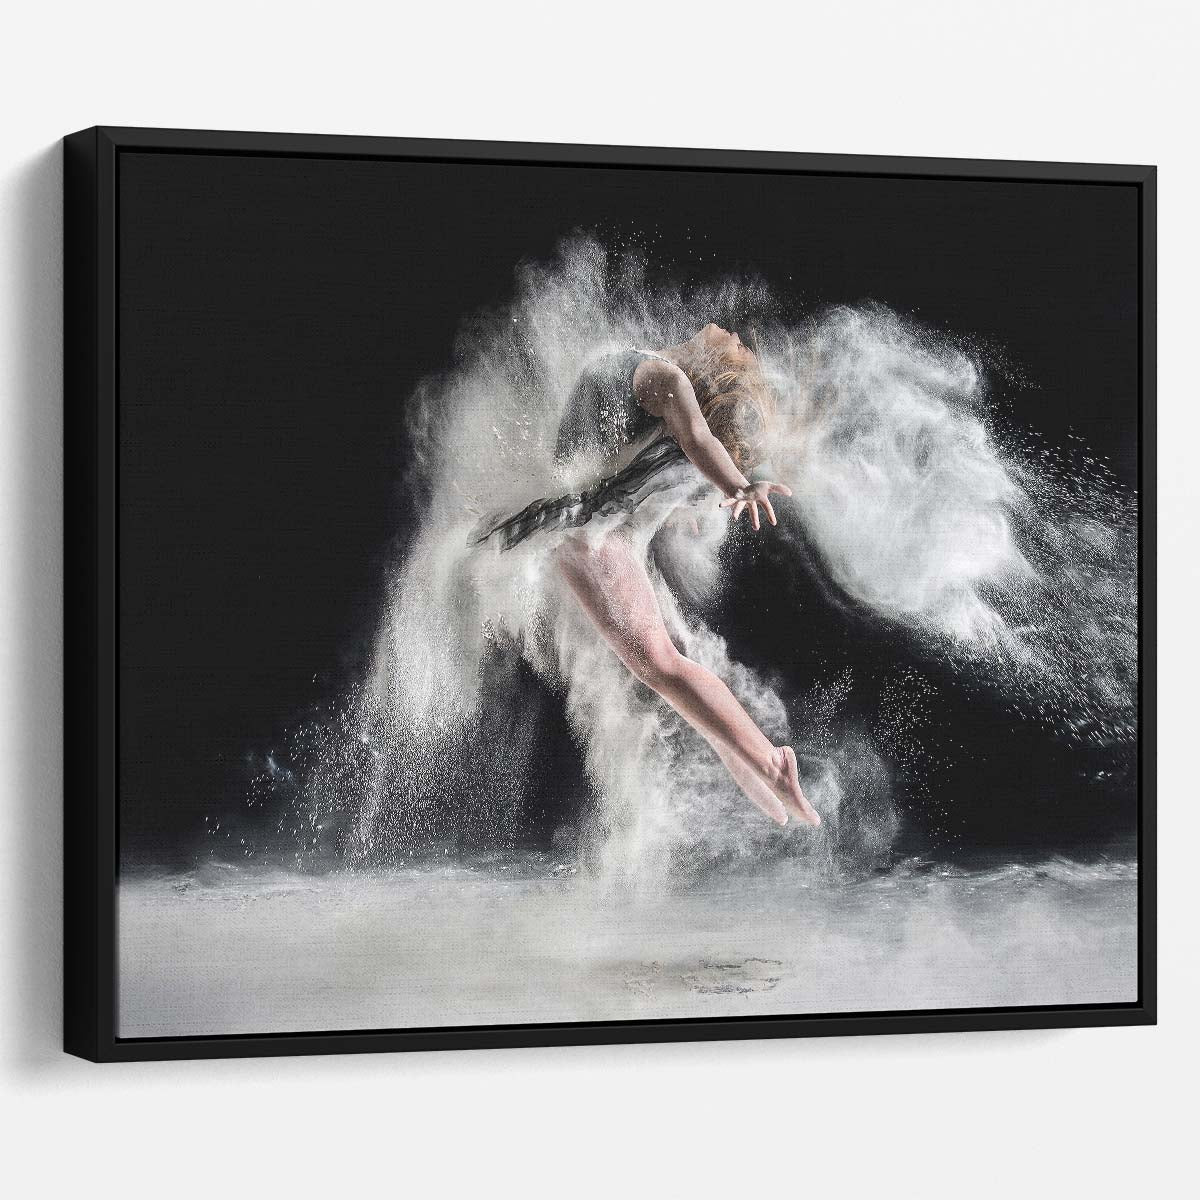 Dramatic Leap Dance Explosion Female Performer Wall Art by Luxuriance Designs. Made in USA.